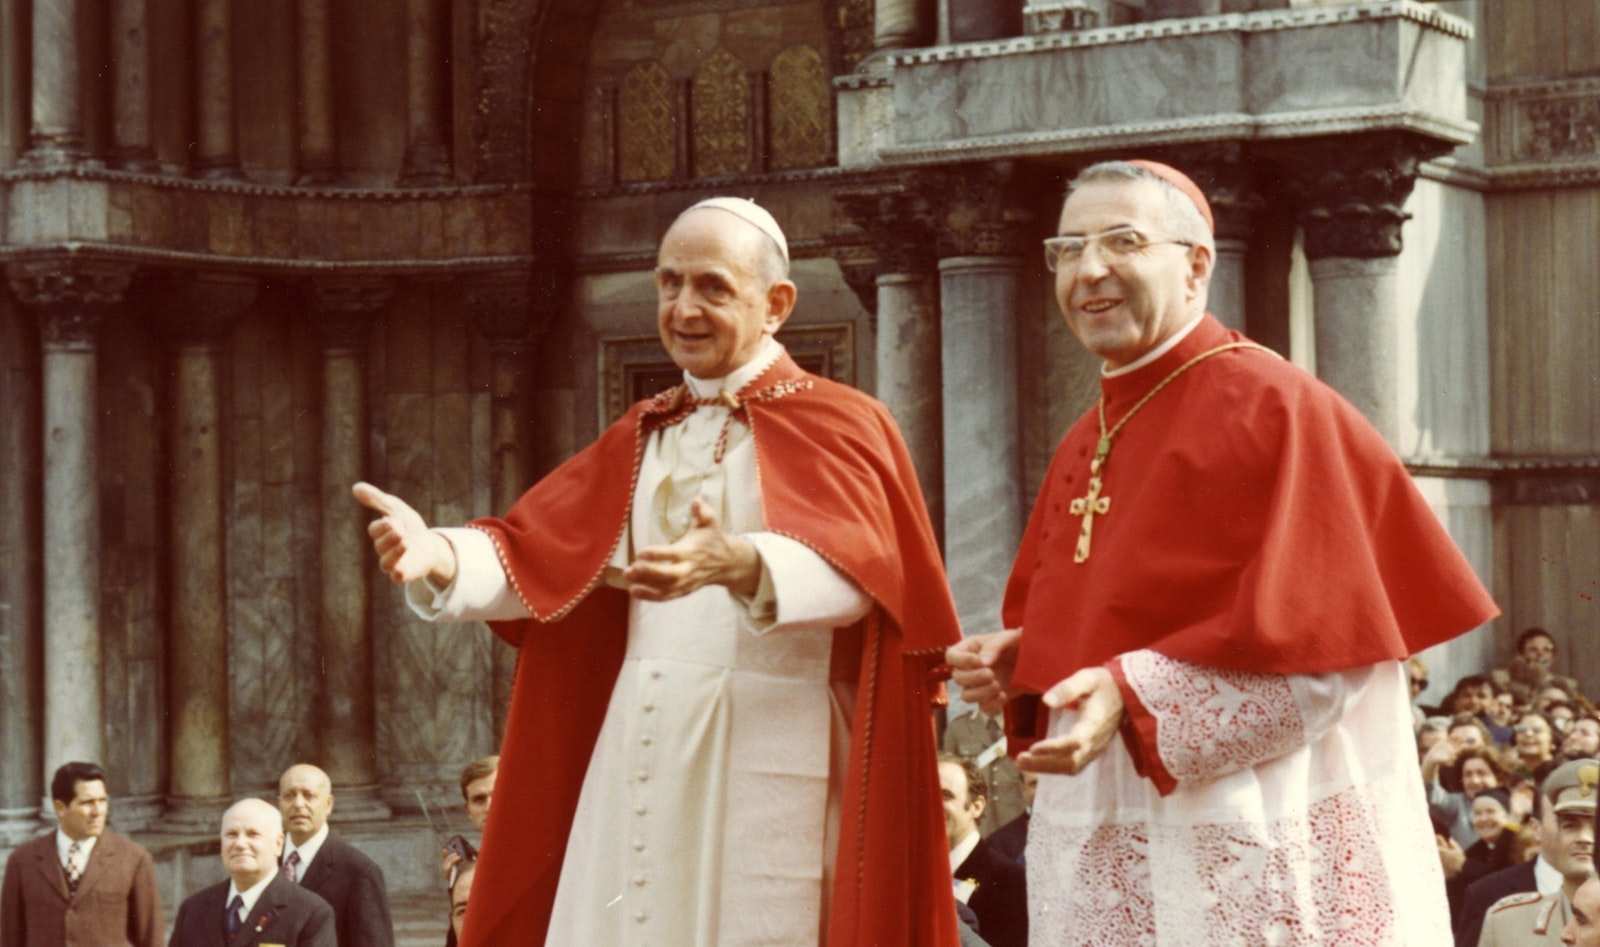 Pope Paul VI and Archbishop Albino Luciani, the future Pope John Paul I, are pictured in Venice in September 1972. The editorial director of Vatican News, Andrea Tornielli, wrote in a June 21 article that Archbishop Albino Luciani, the future Pope John Paul I, had hoped that Pope Paul VI would liberalize church teaching on artificial birth control, but when he didn't, the archbishop helped promote acceptance of "Humanae Vitae." (CNS photo)